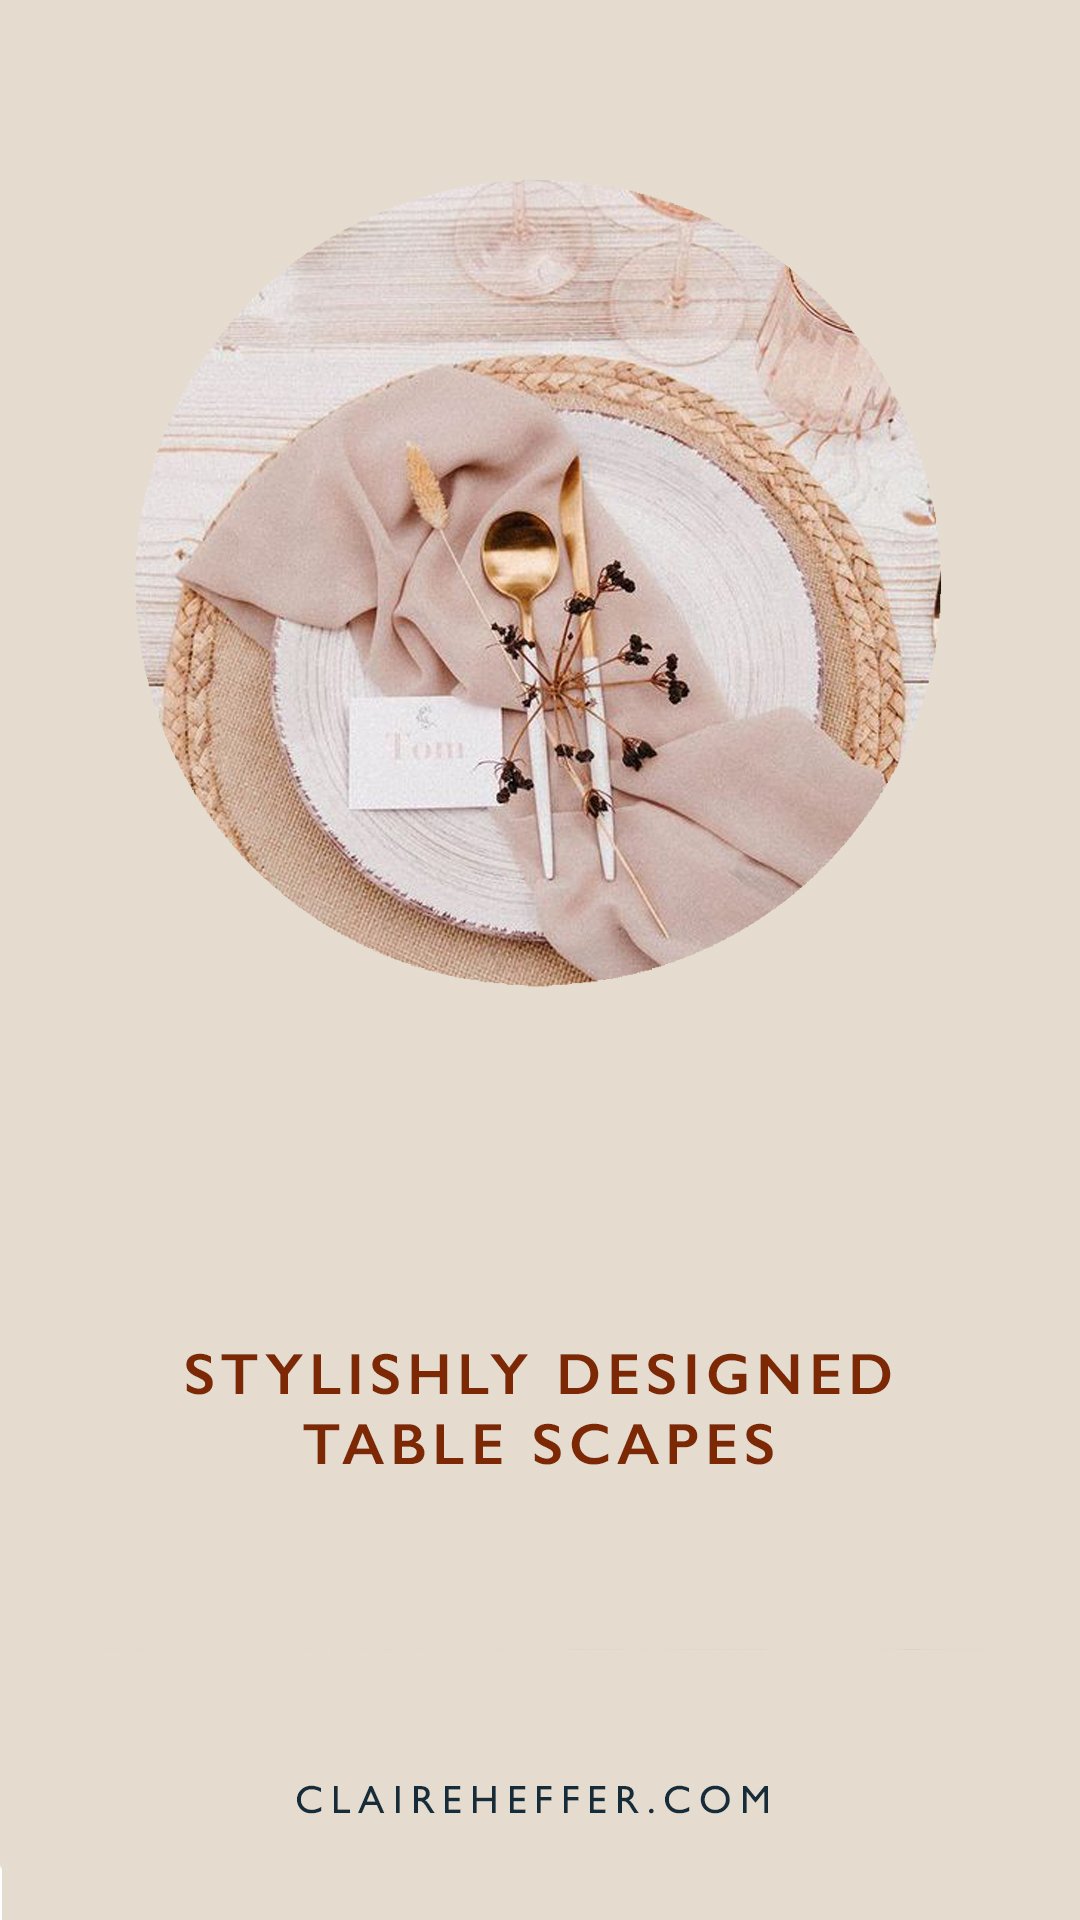 _TABLE STYLING12.jpg